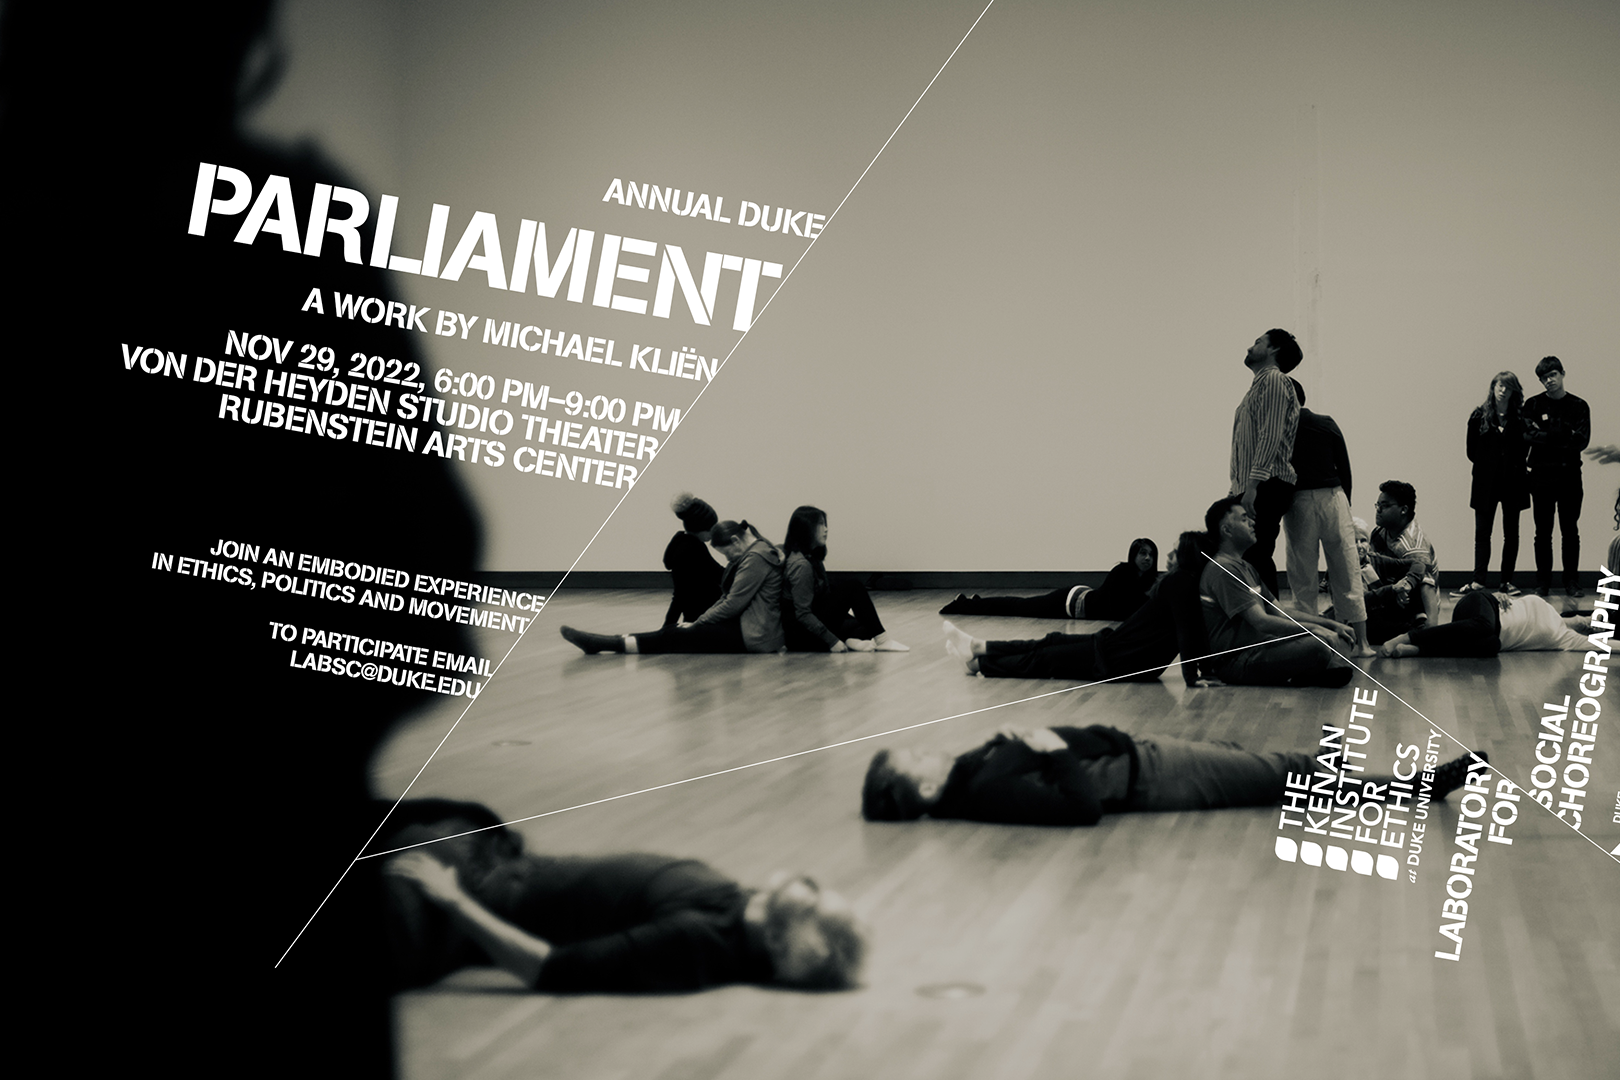 Black and sepia-toned photograph of people in gallery space. Some lie on the floor, some sit or stand in small groups, some dance.  Annual Duke Parliament A Work by Michael Kliën   Nov. 29, 2022, 6:00PM–9:00PM Von der Heyden Studio Theater Rubenstein Arts Center  Join an Embodied Experience in Ethics, Politics and Movement  To participate email labsc@duke.edu